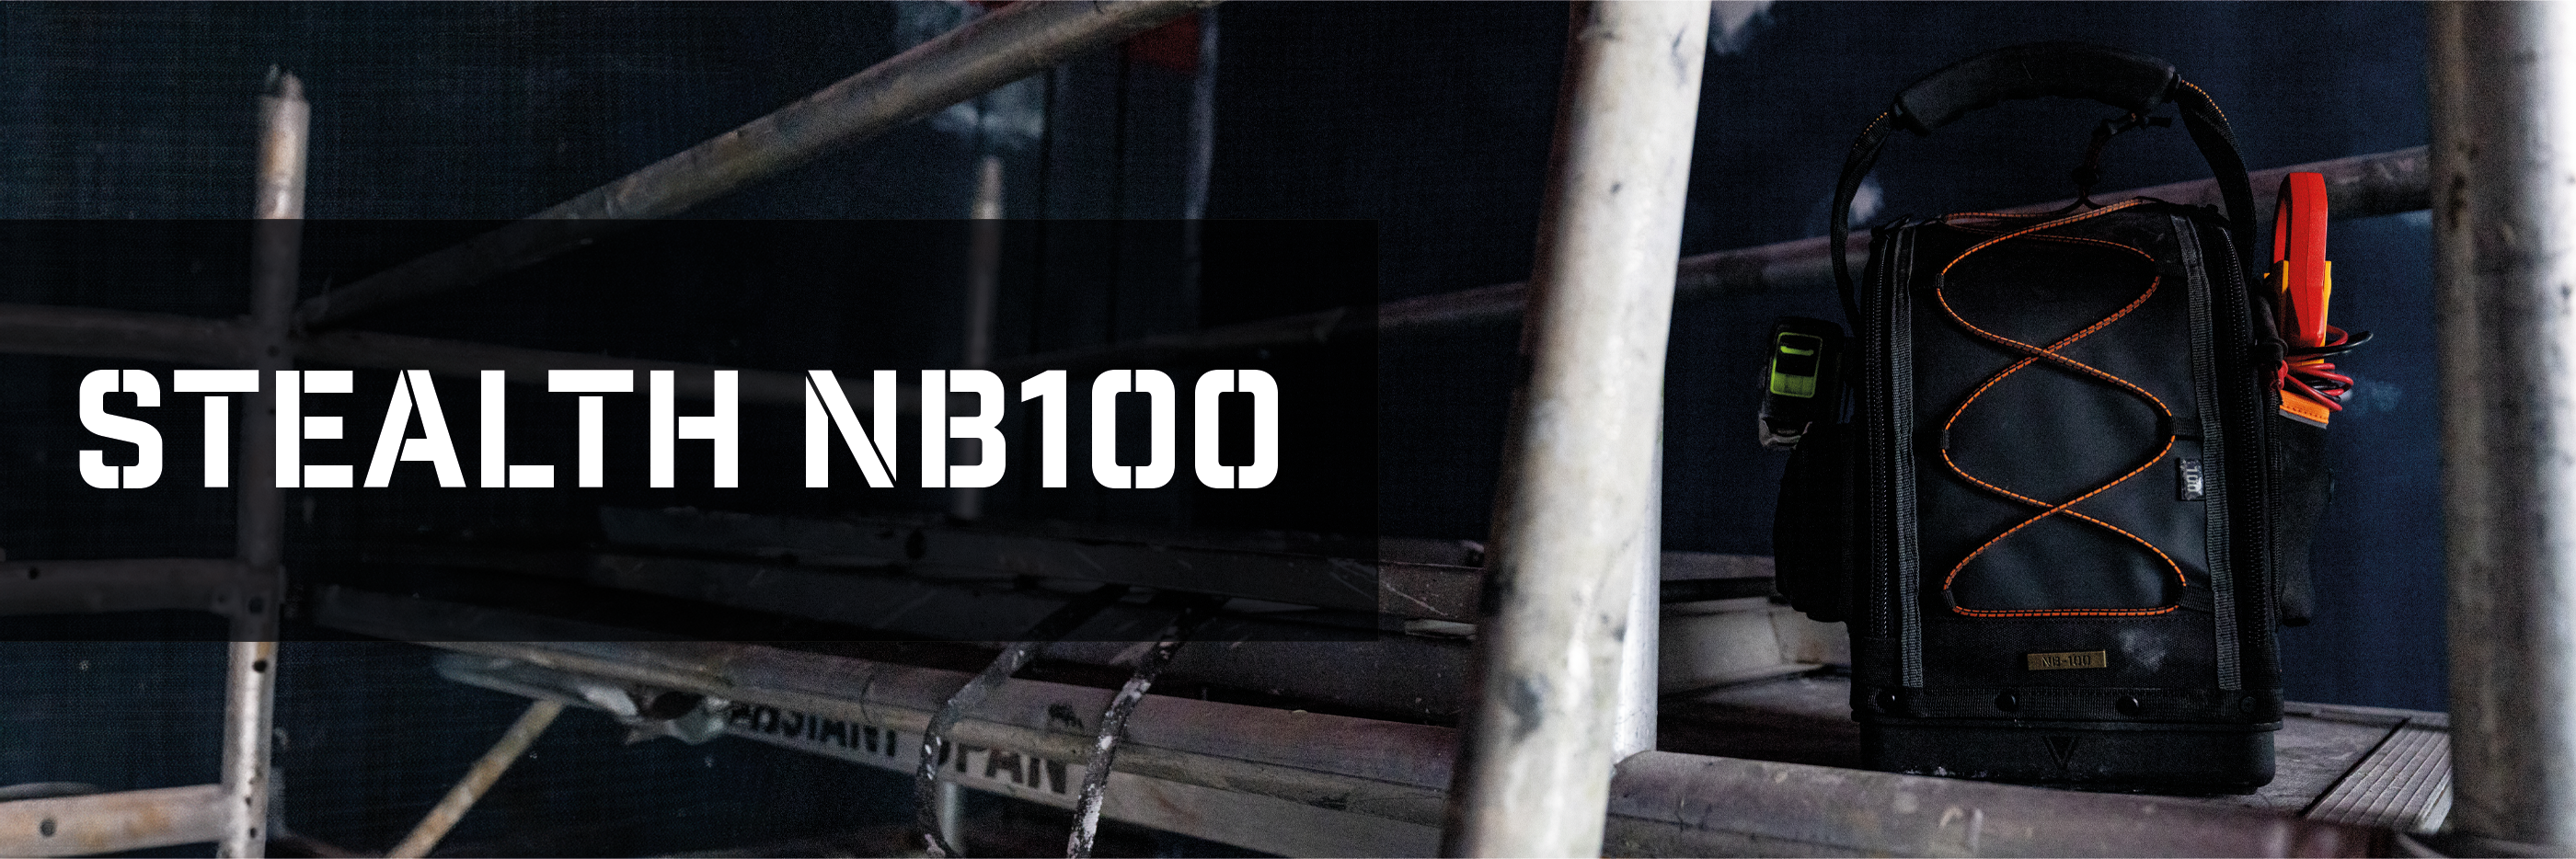 Stealth NB100 Tool Bag set on Scaffolding, with white text